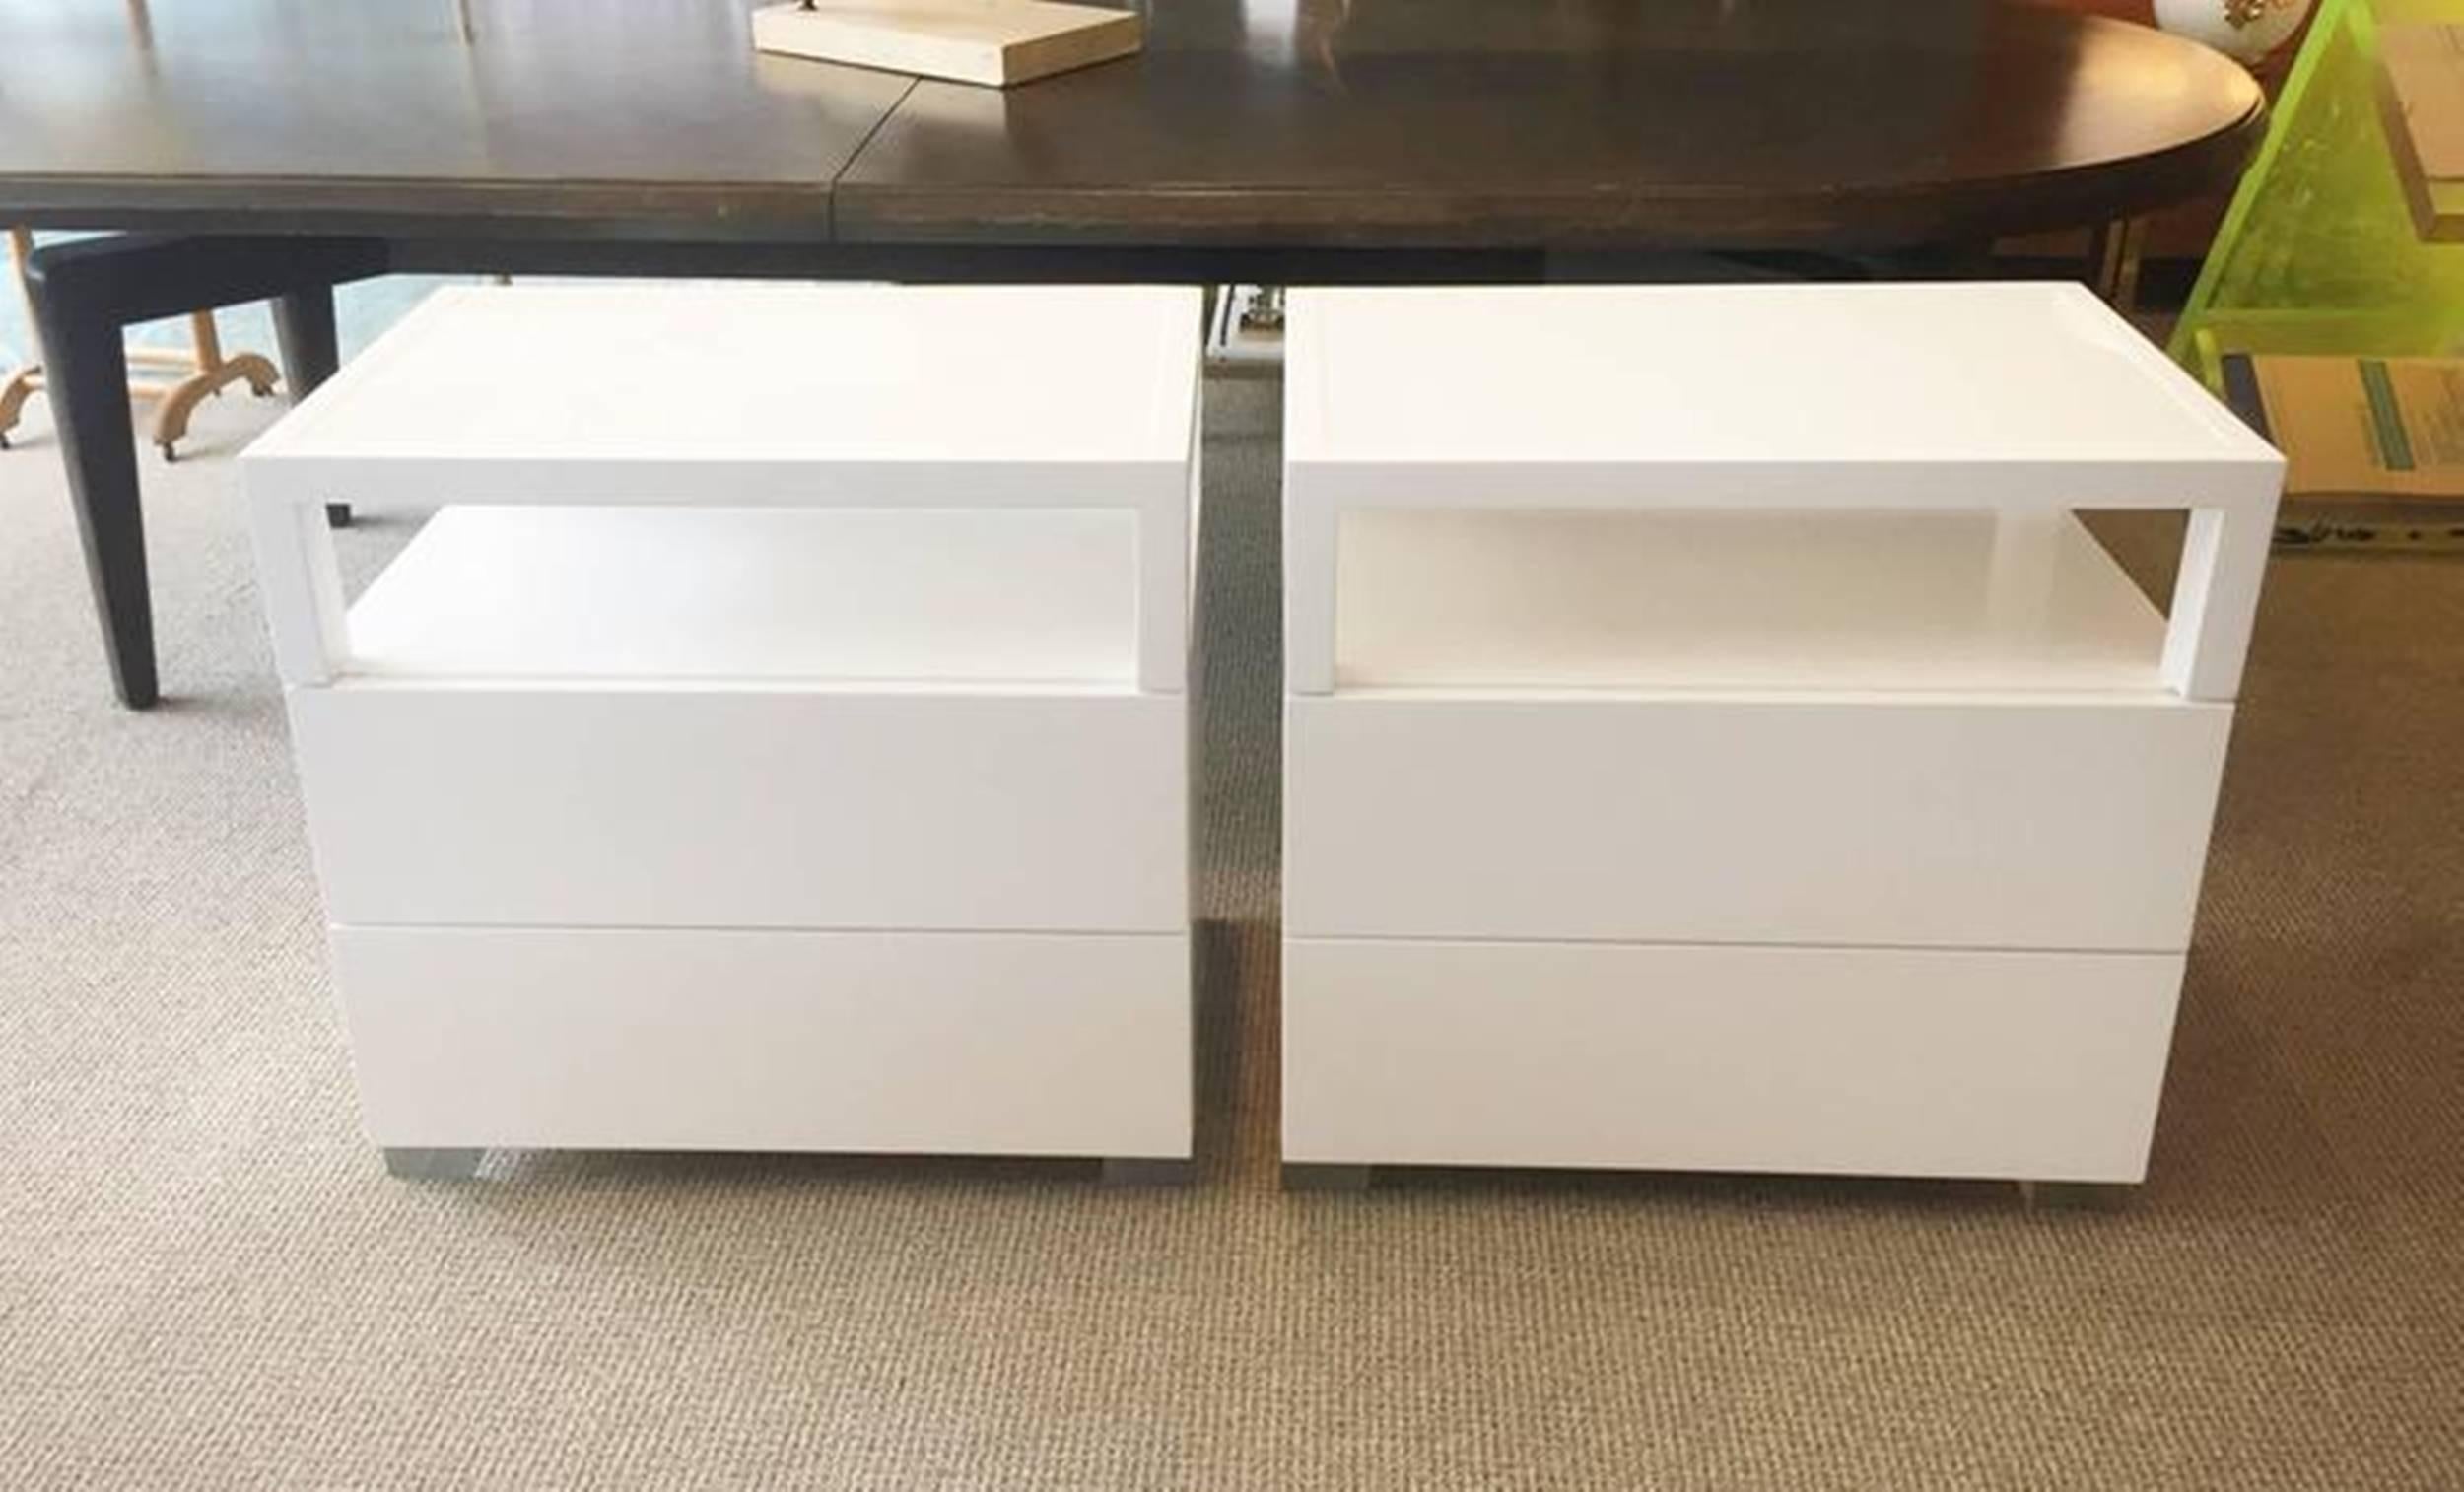 American Pair of White Lacquer and Lucite Nightstands by Cain Modern